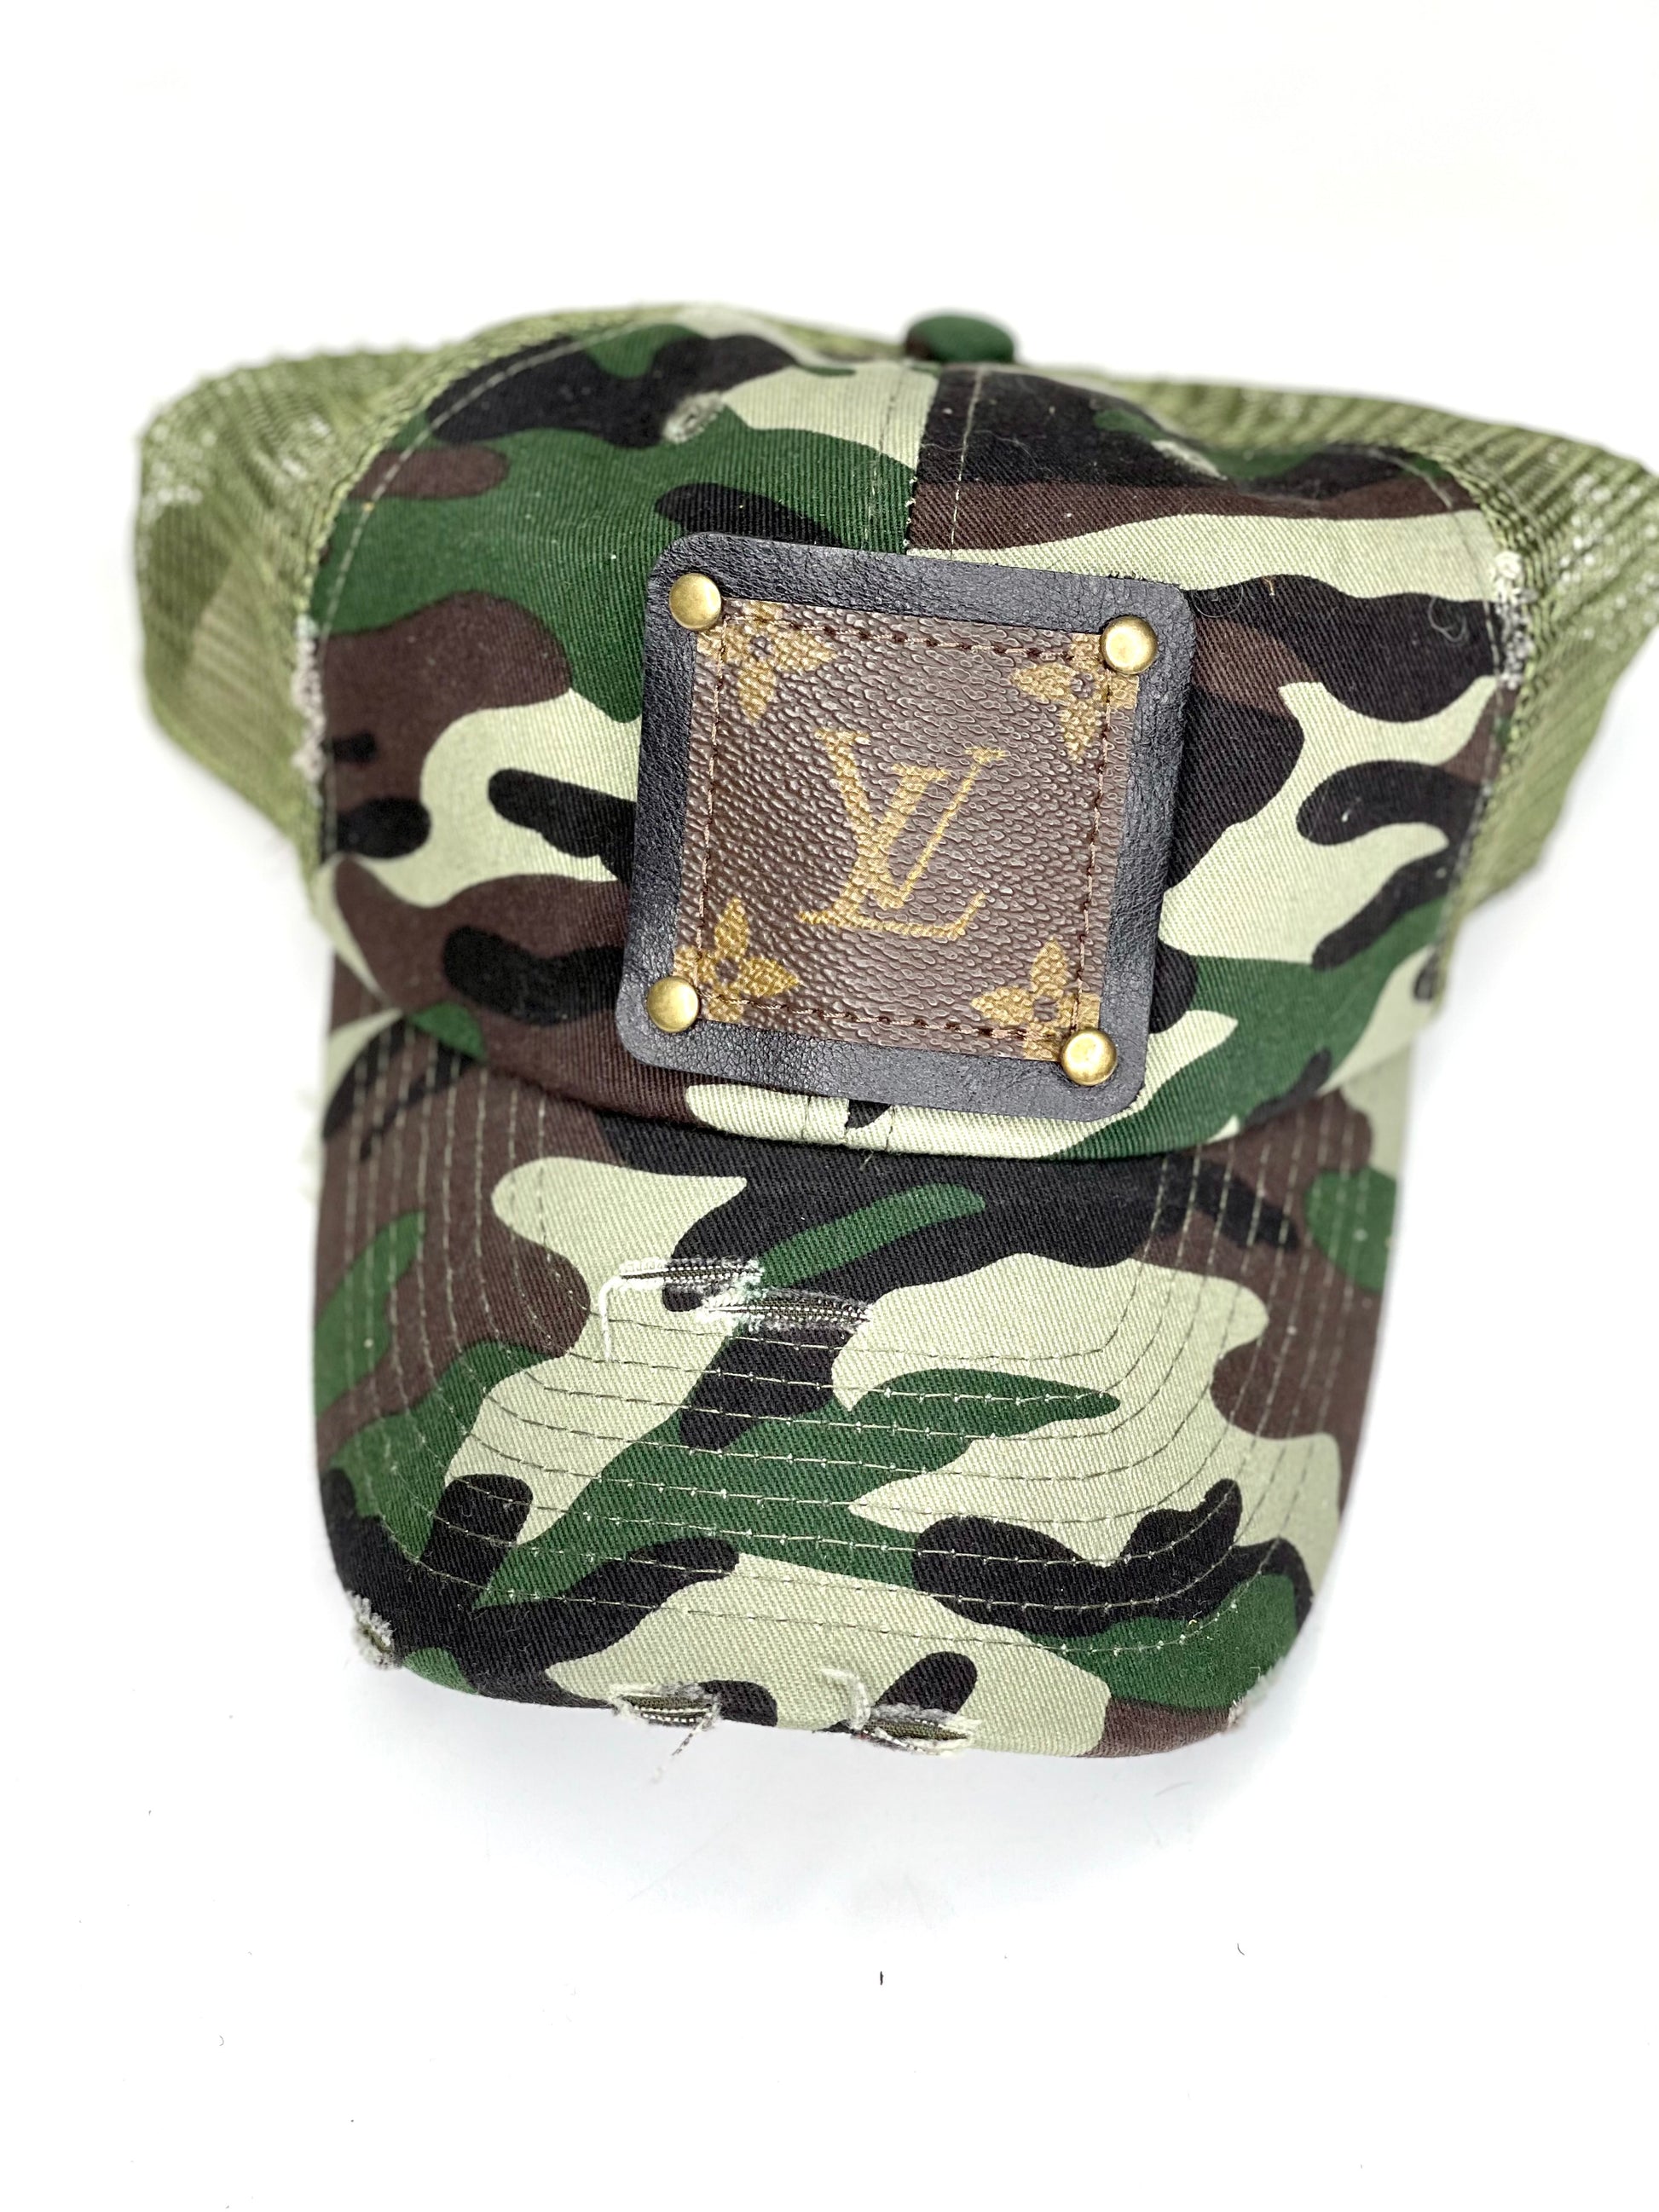 CC1- Distressed Camouflage Trucker Hat Green Mesh Back Black/Antique - Patches Of Upcycling